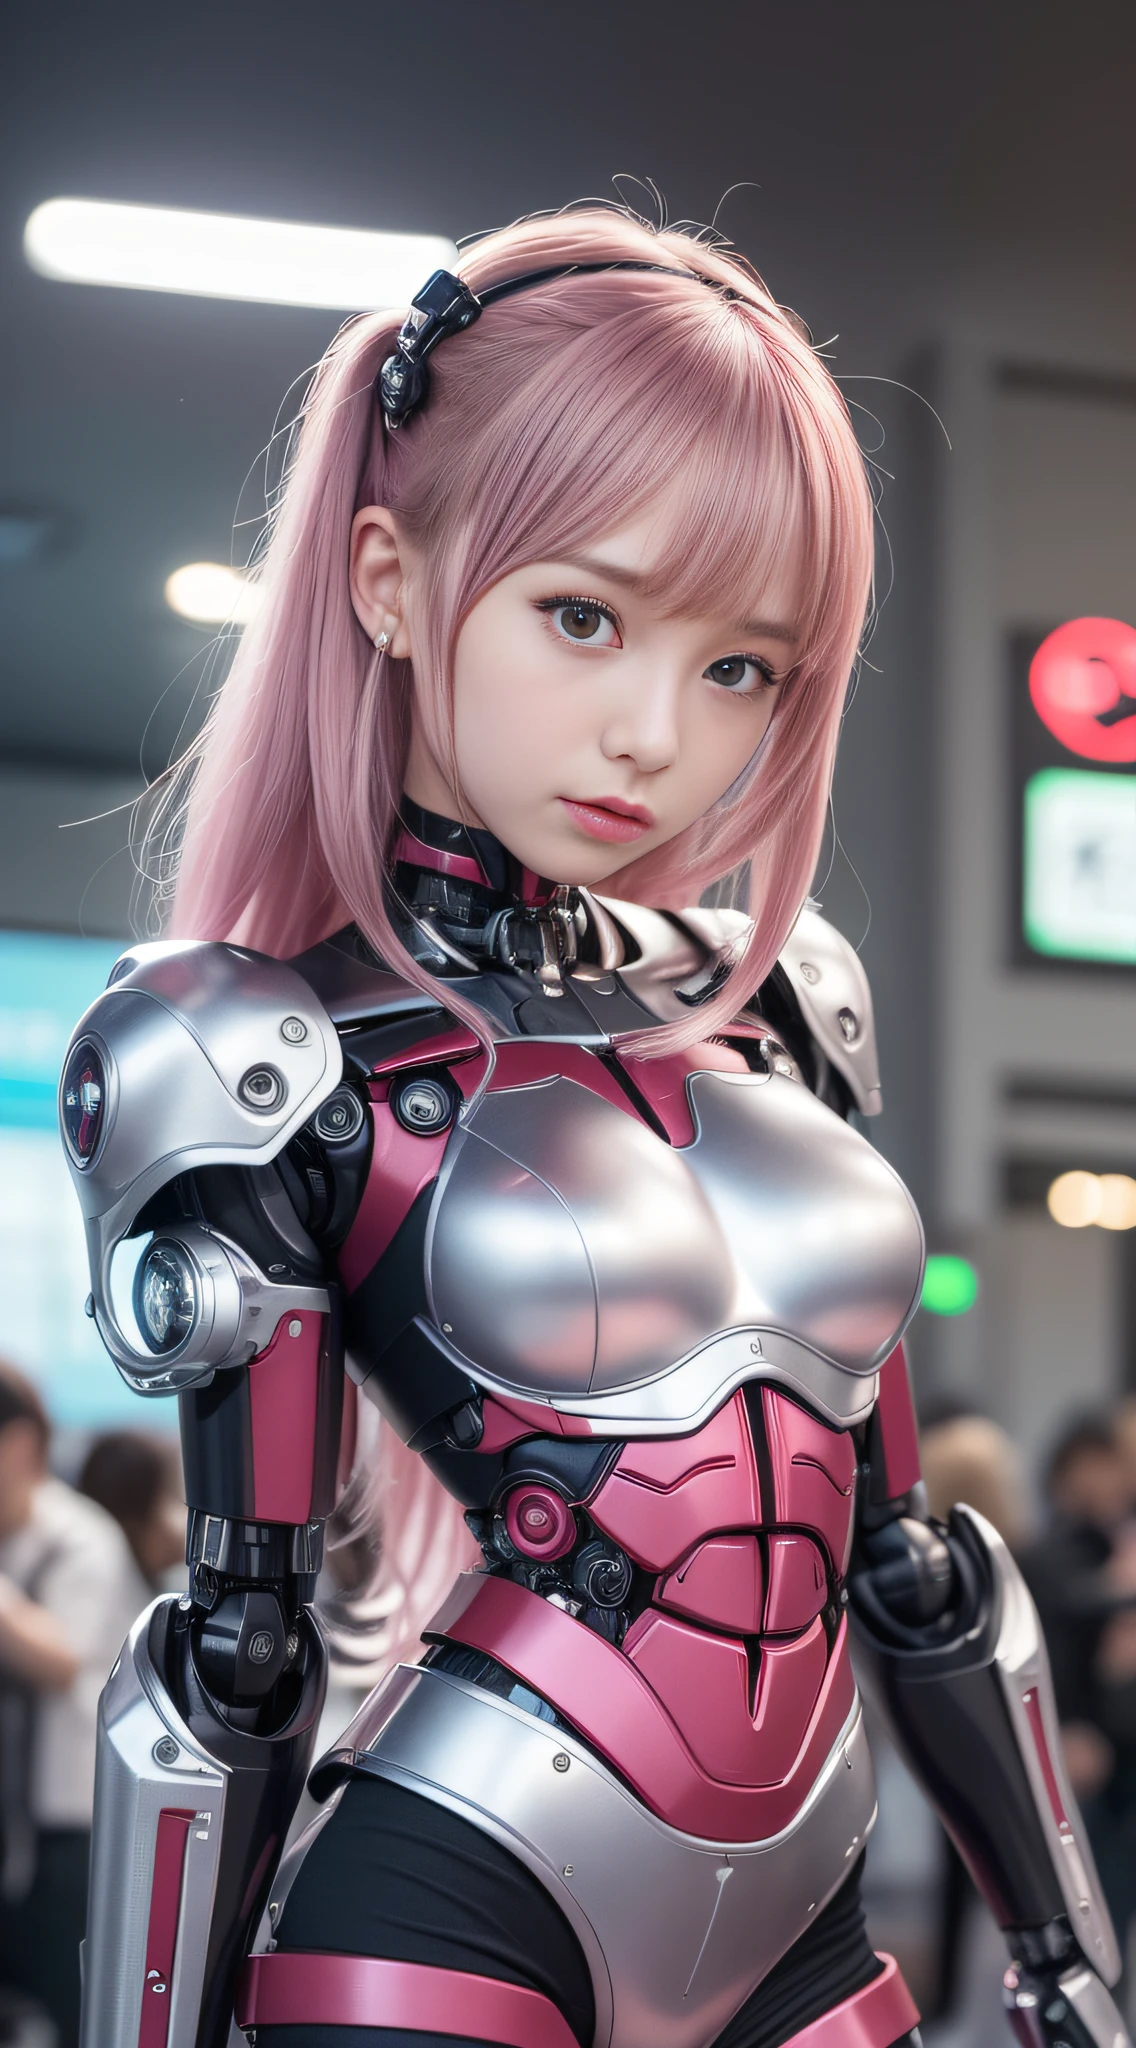 (Photorealsitic:1.4)、Onegirl、(top-quality),(hyperdetailed face)、(Super well-formed face)、((Robot Parts))、(Cyborg girl)、(pink there)、(Burgundy)、(metalic)、(fullllbody)、(Moe Pose)、(Slender body)、(tits out)、(Model body type)、(mecha exposure)、(akihabara)、(is looking at the camera)、(A dark-haired)、(９Head and body)、(a small face)、(Idol)、(front facing)、(is standing)、(Photo session)、(Looks sad)、(Cyborg girl in stage costume)、(sleeve less)、(a miniskirt)